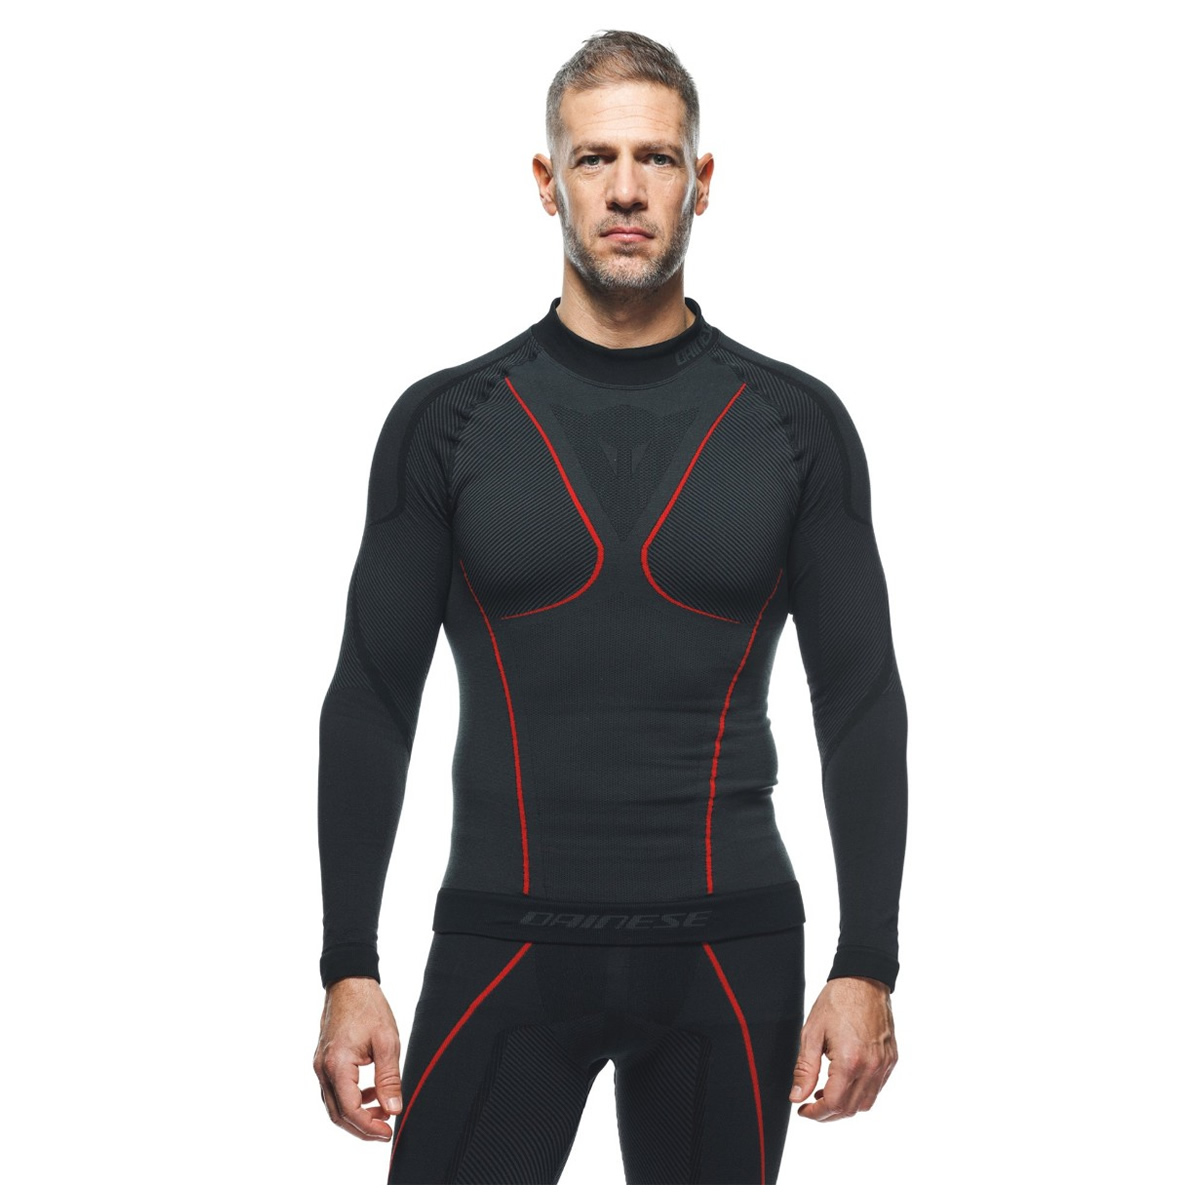 Dainese Funktionsshirt Thermo LS, schwarz-rot